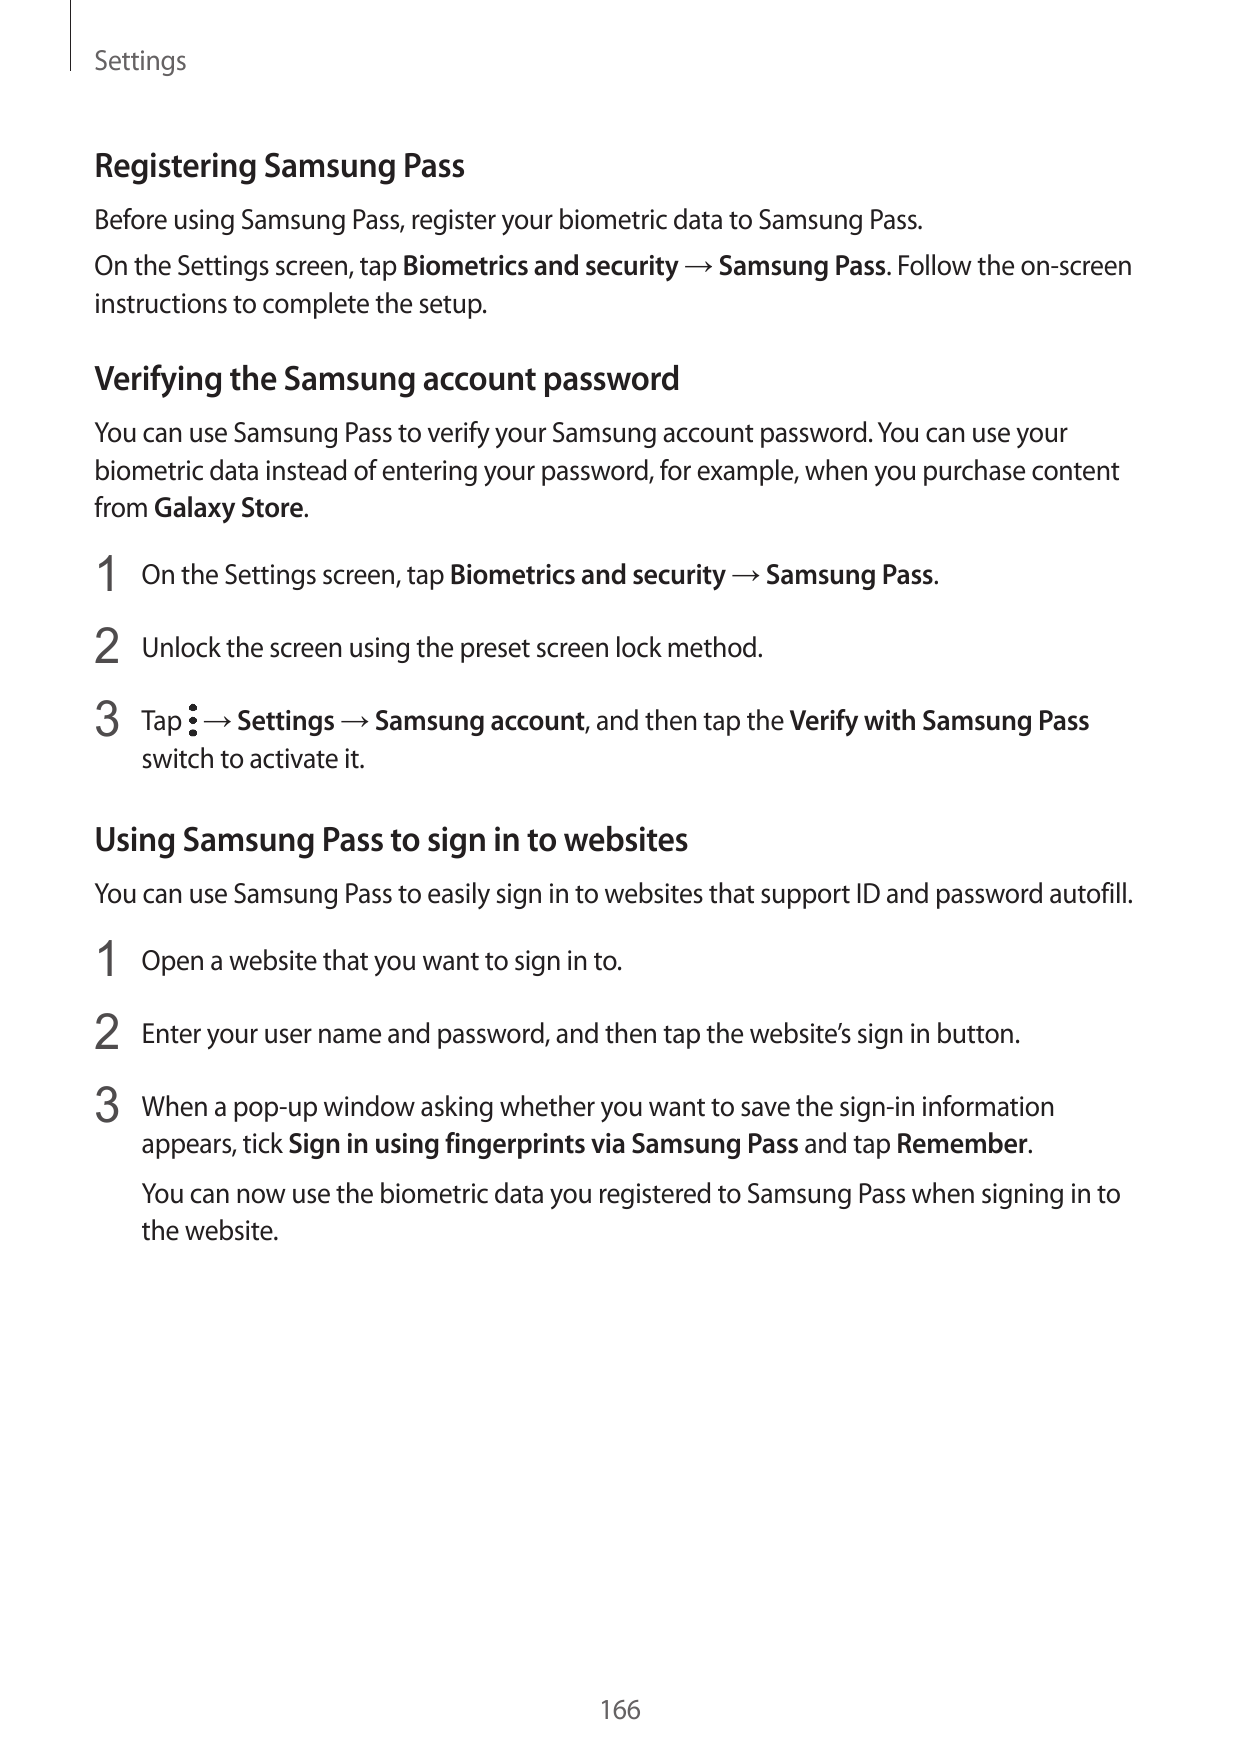 SettingsRegistering Samsung PassBefore using Samsung Pass, register your biometric data to Samsung Pass.On the Settings screen, 